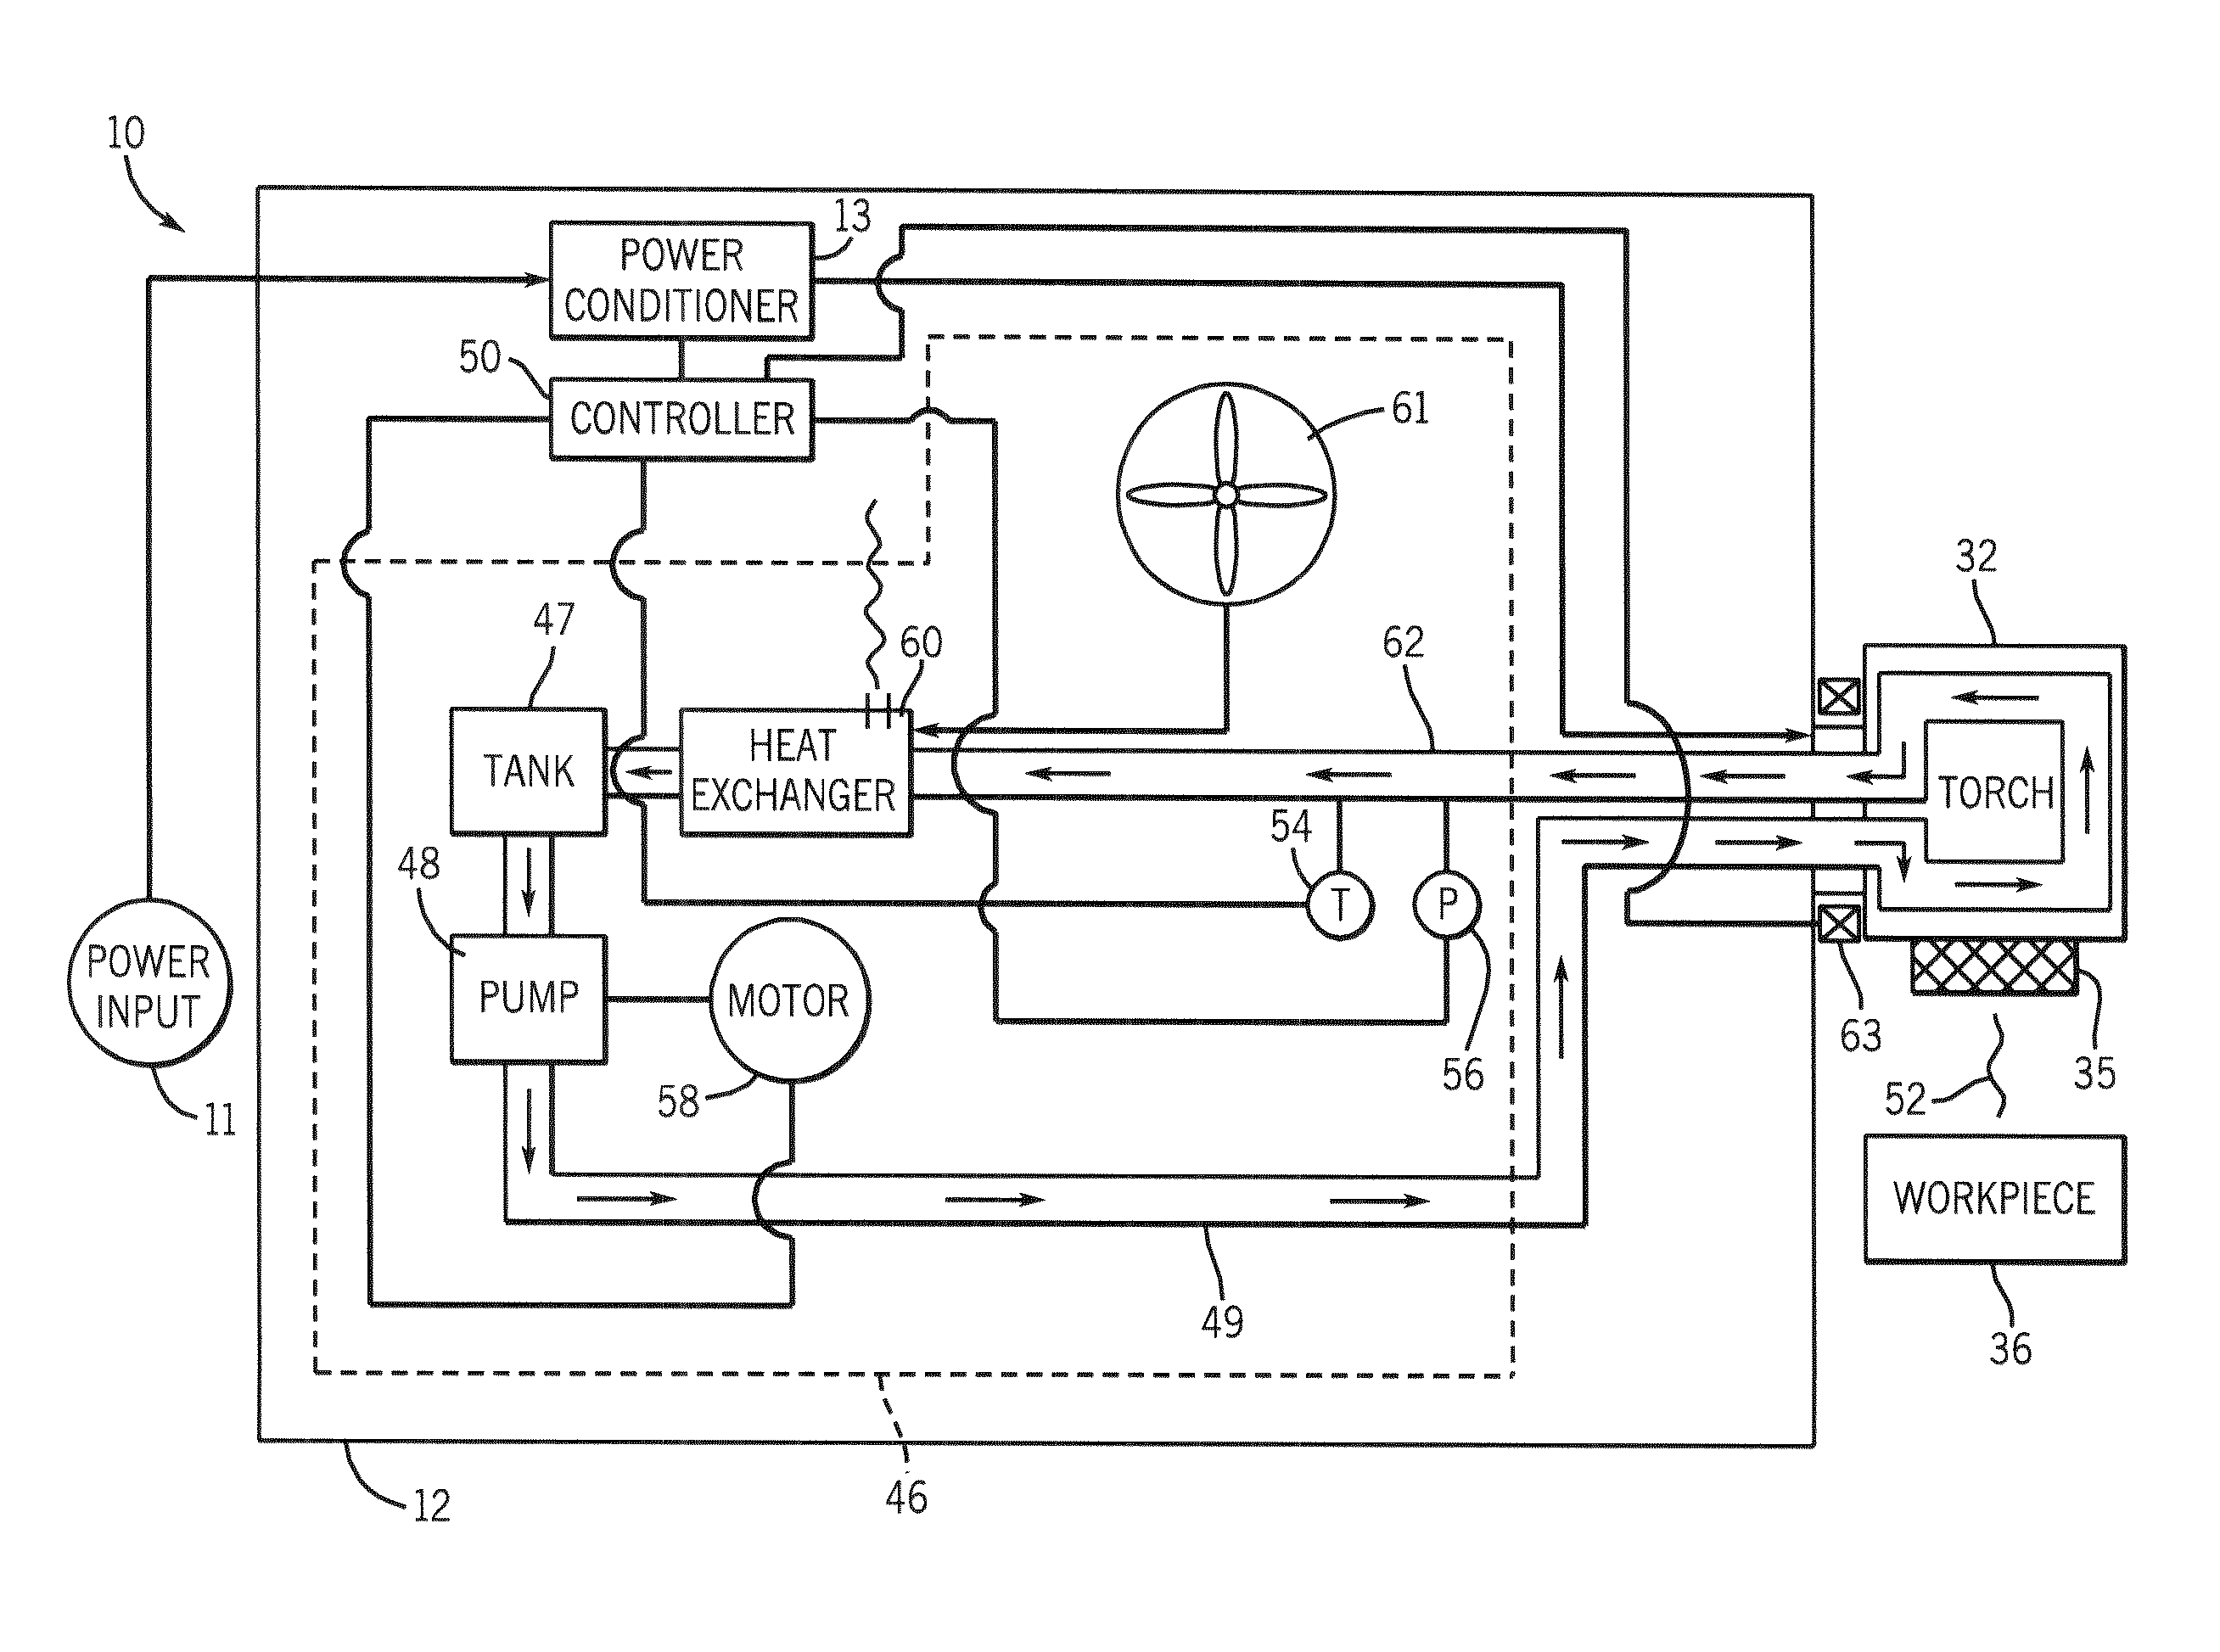 Torch connection detection system and method